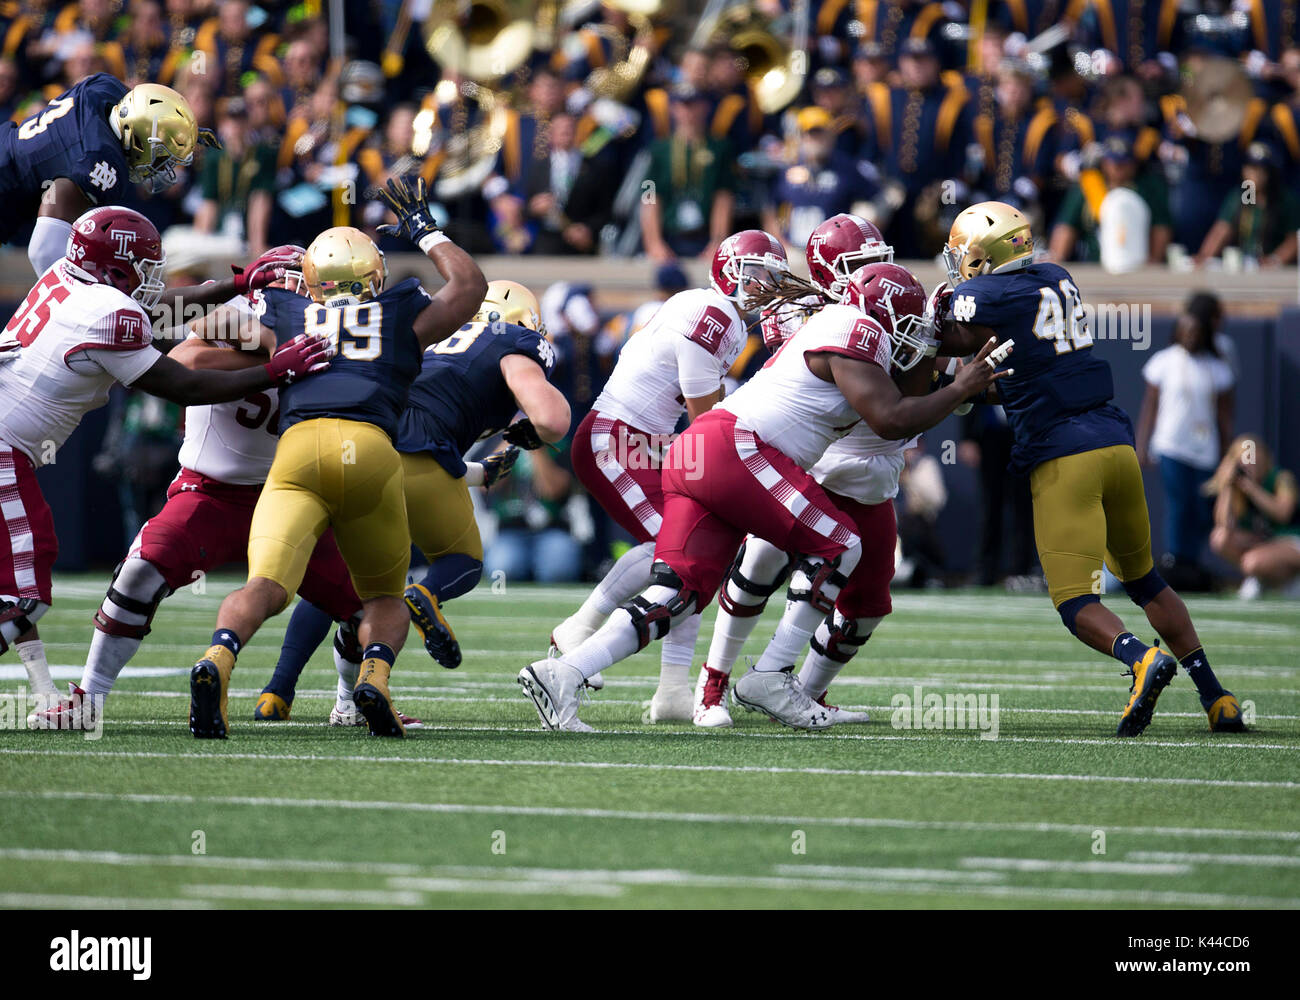 South Bend, Indiana, USA. 02nd Sep, 2017. Players battle at the line of scrimmage during NCAA football game action between the Temple Owls and the Notre Dame Fighting Irish at Notre Dame Stadium in South Bend, Indiana. Notre Dame defeated Temple 49-16. John Mersits/CSM/Alamy Live News Stock Photo